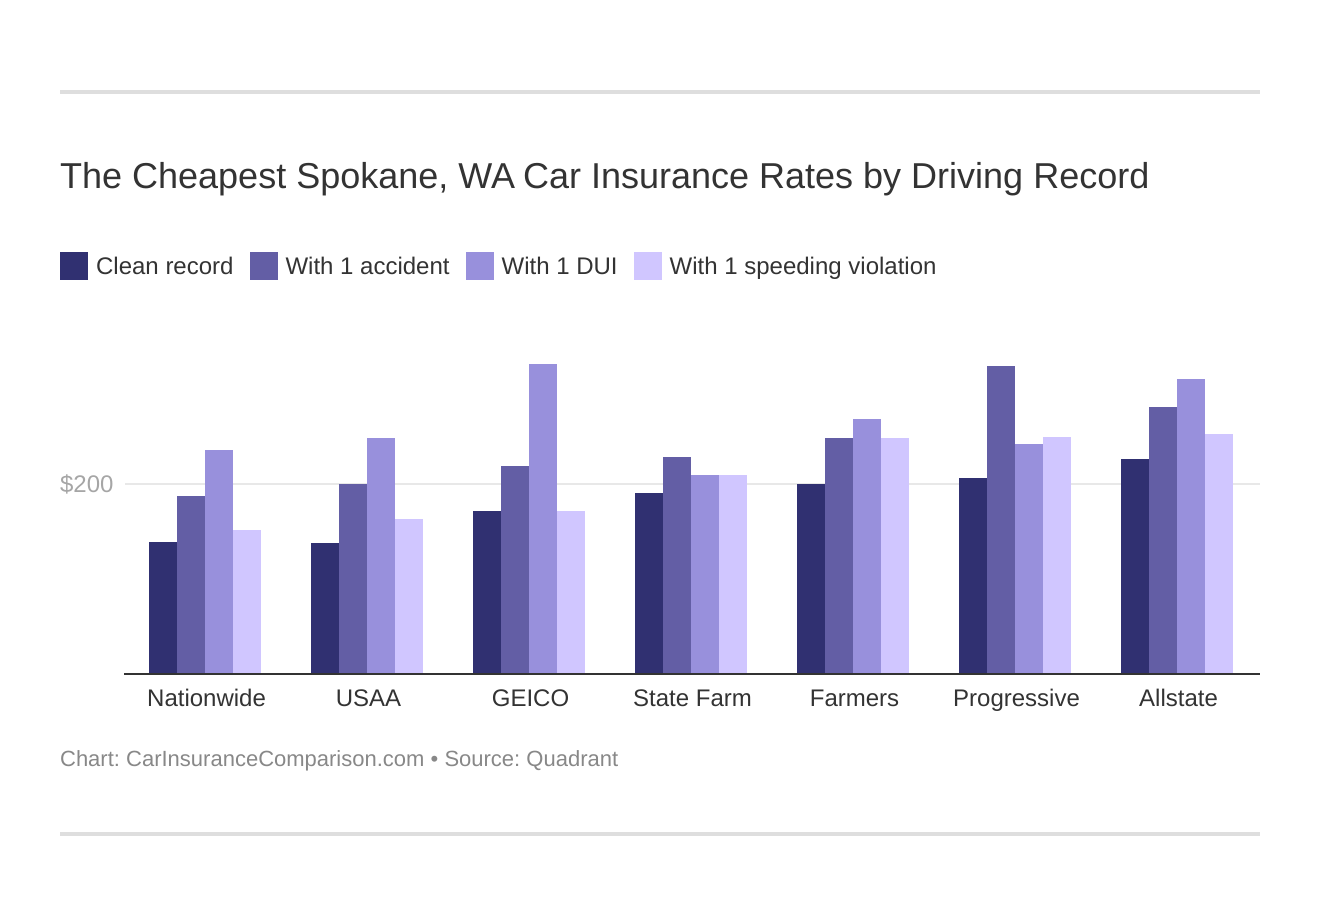 The Cheapest Spokane, WA Car Insurance Rates by Driving Record